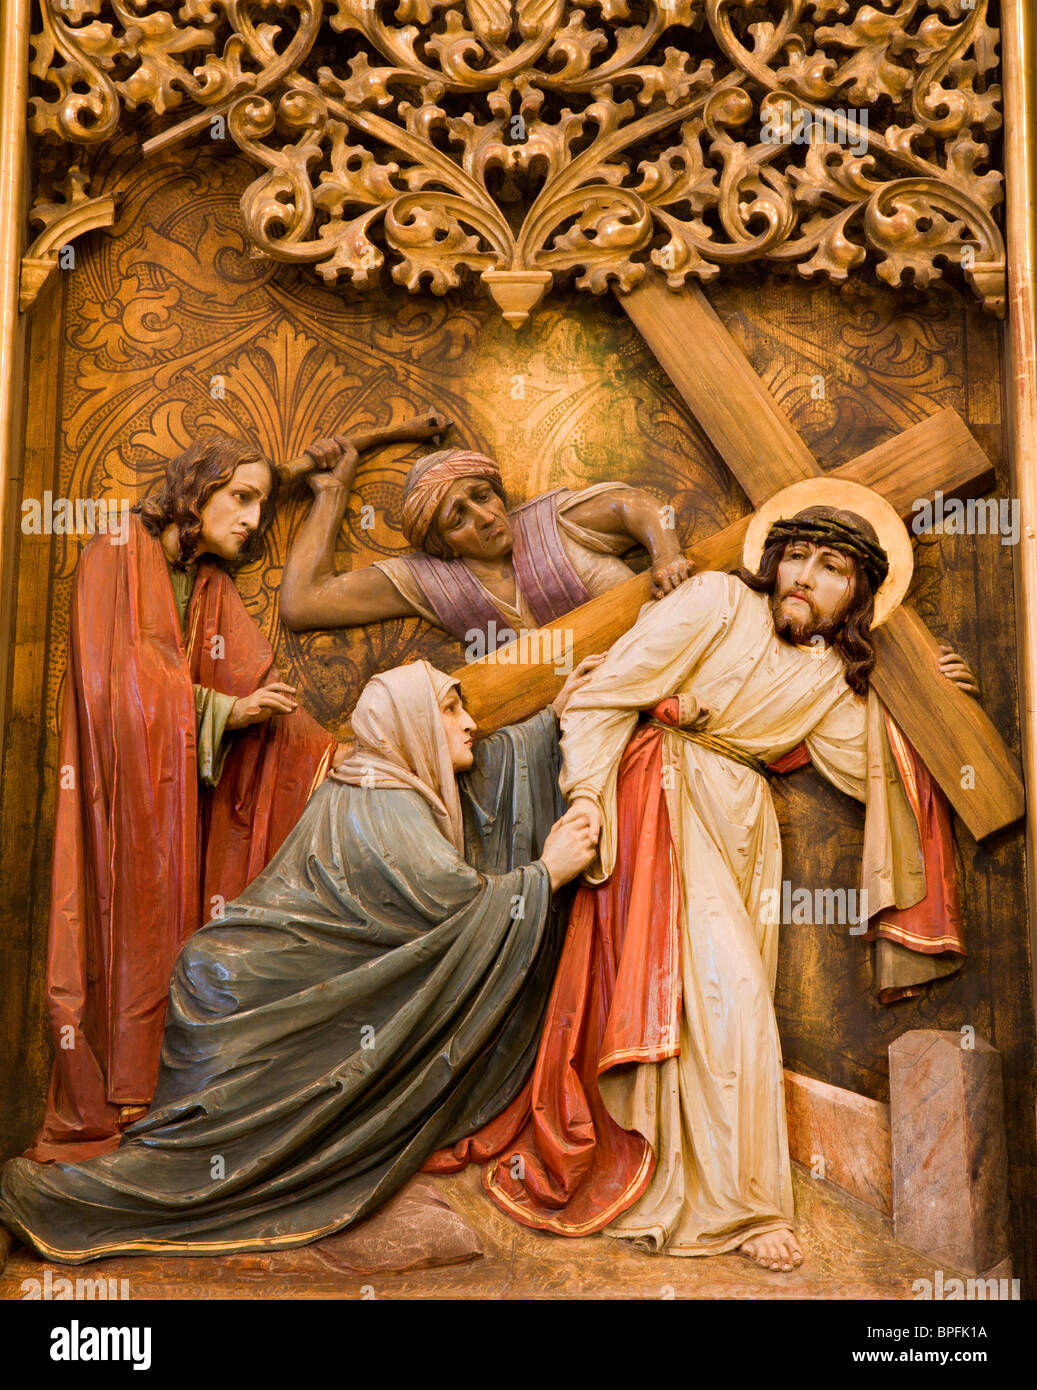 Bratislava - detail of gothic altar from st. Martins cathedral - Jesus and hl. Mary on the cross-way Stock Photo